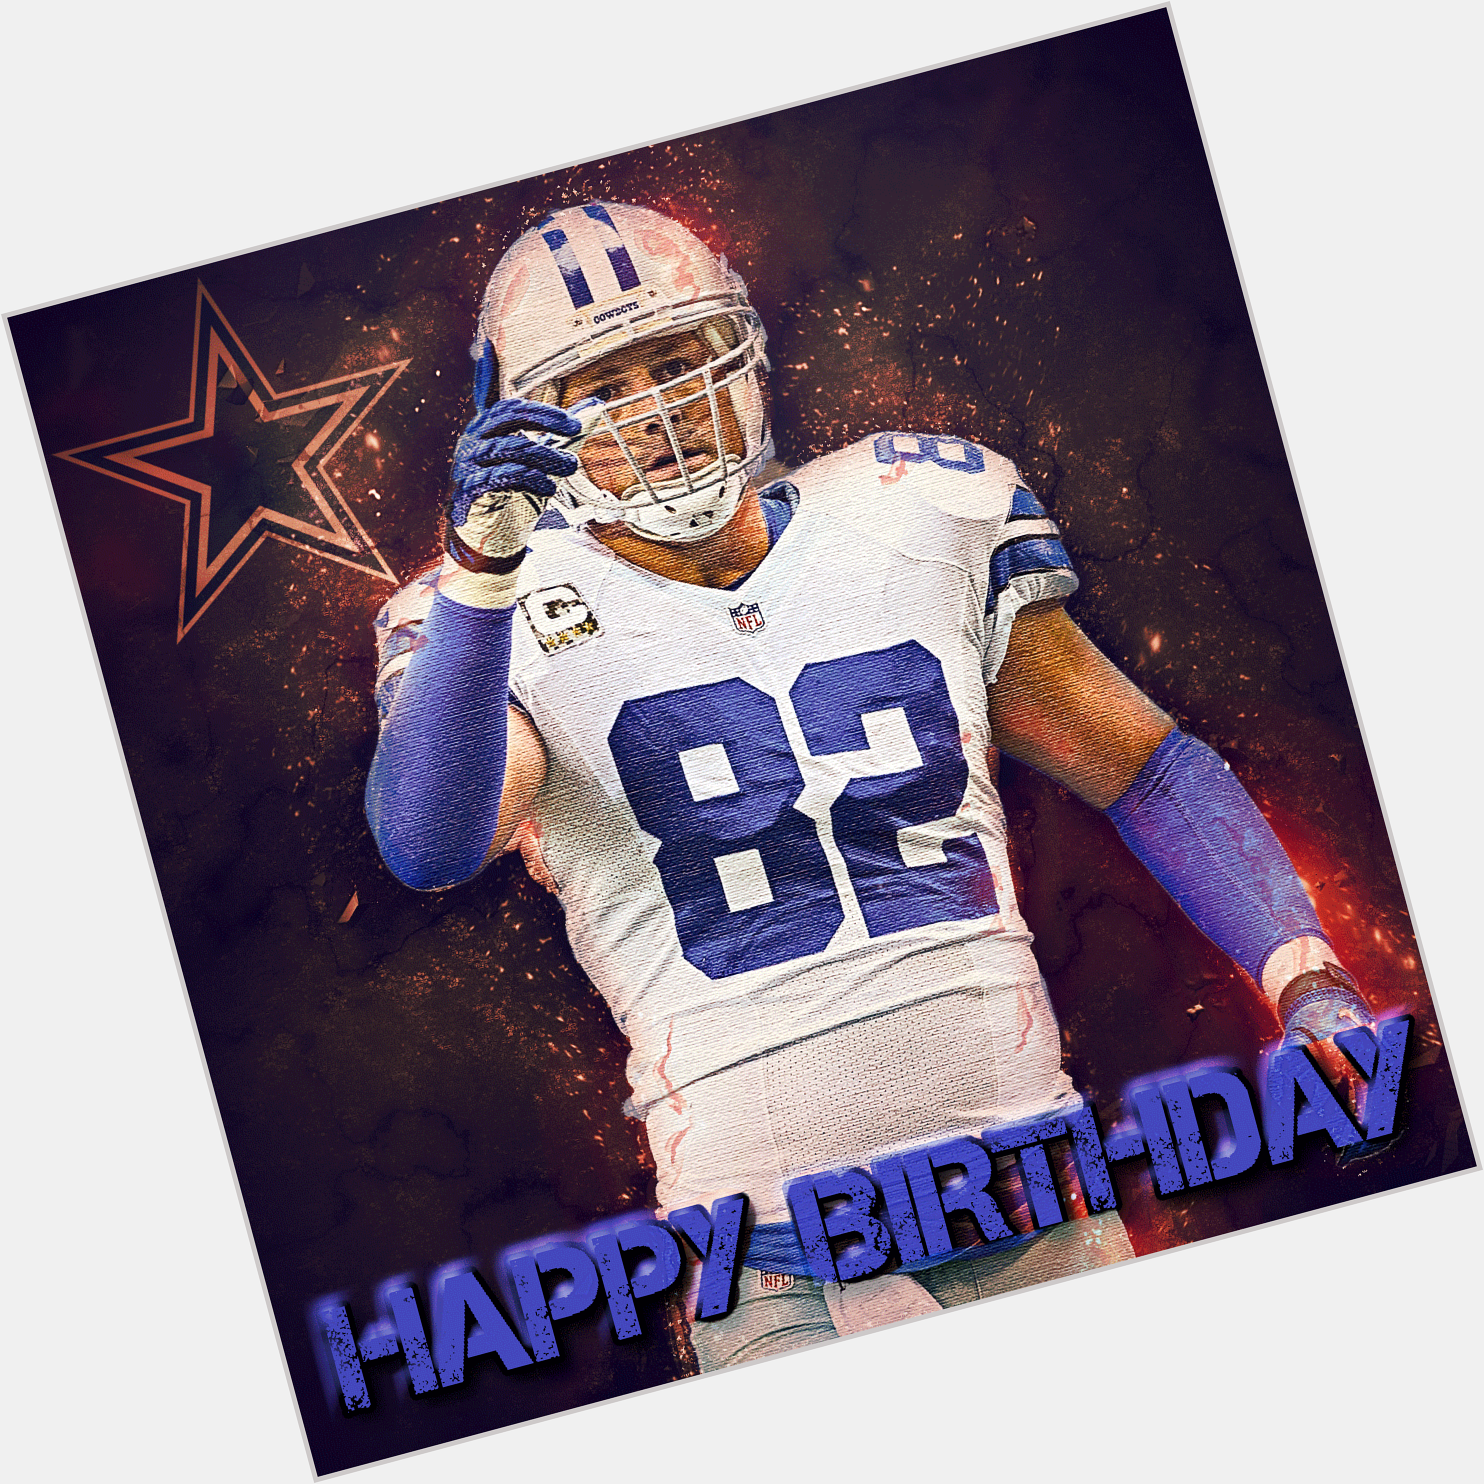 Happy Birthday to 10-time Pro Bowler, Jason Witten. The Cowboys TE ranks 13th on the NFL s All-Time Rec list with 943 